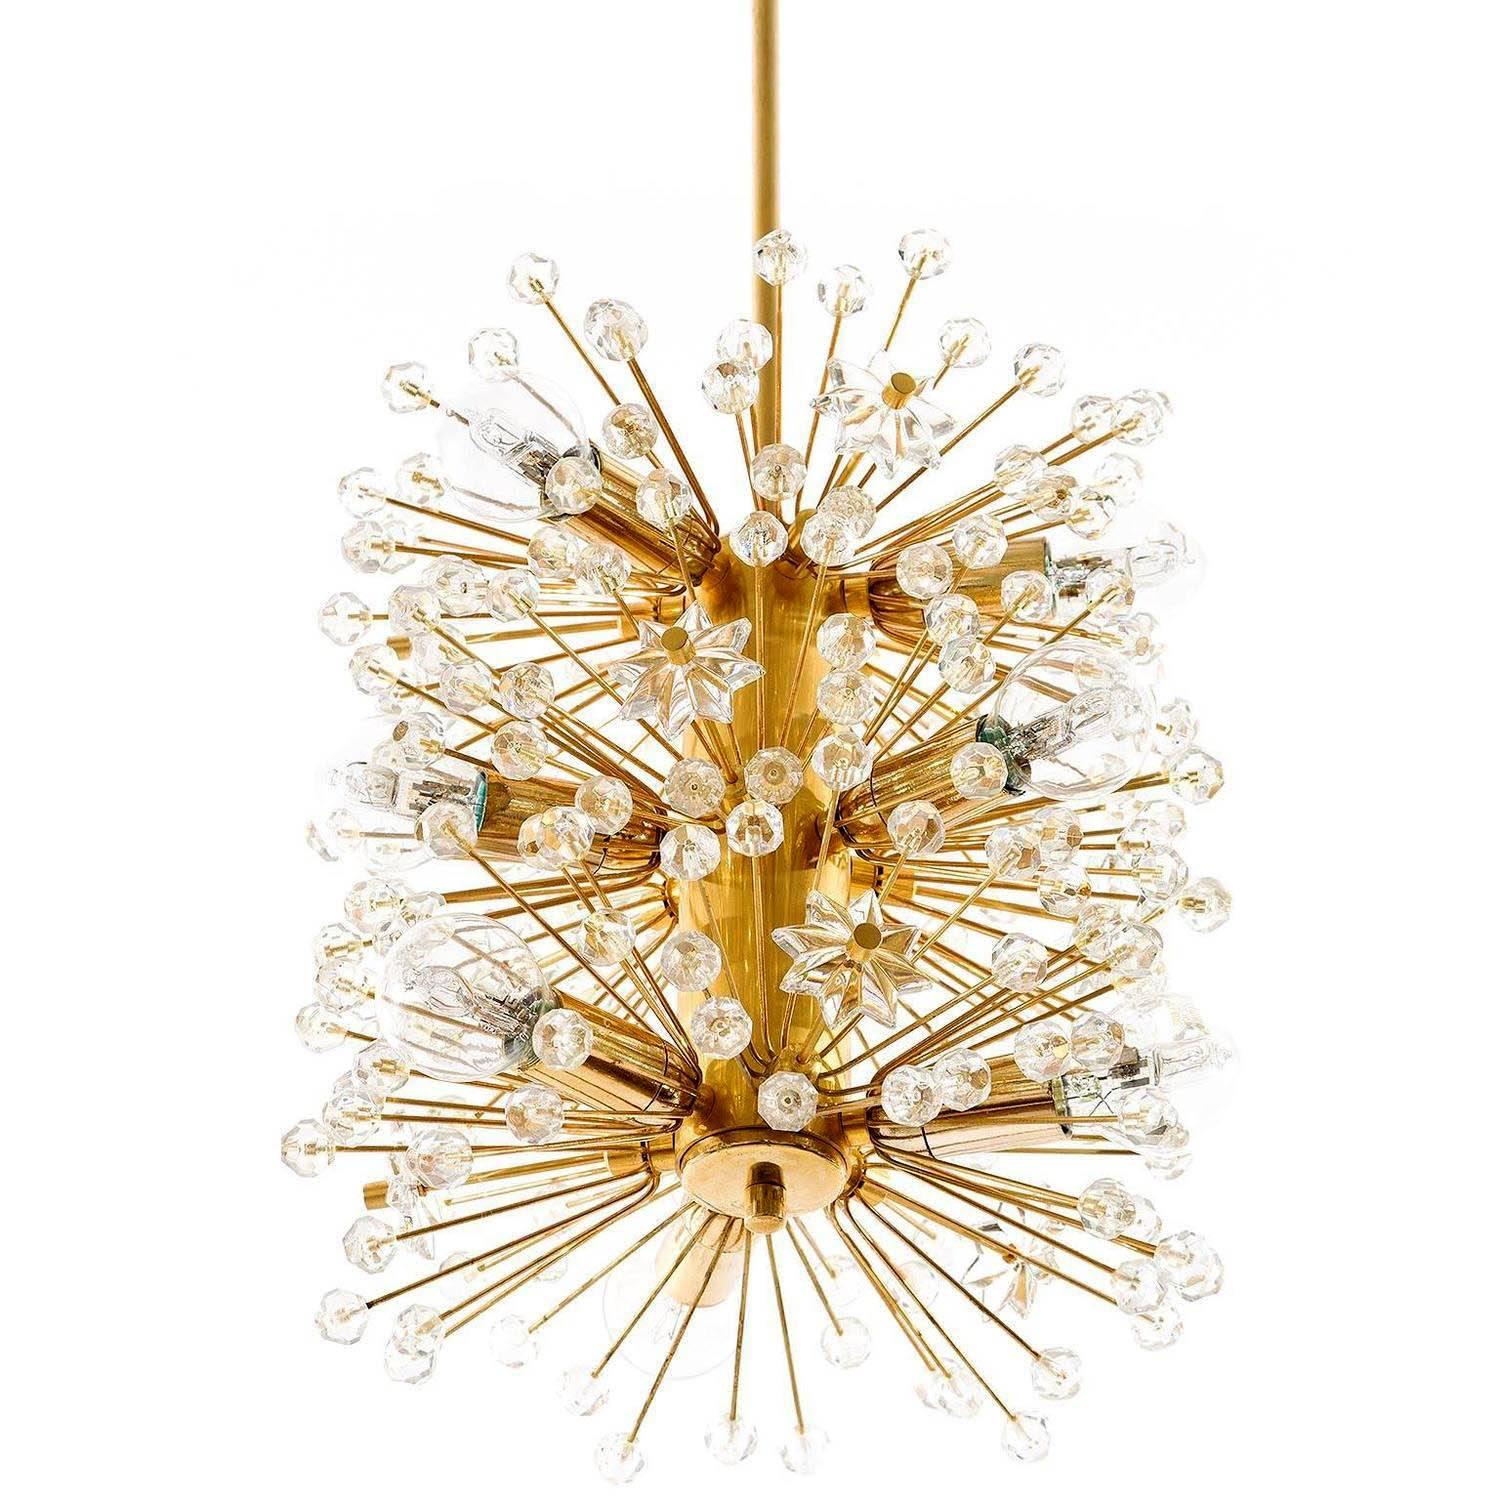 A beautiful gold-plated Viennese snowflake / blowball / Sputnik chandelier or pendant light, designed by Emil Stejnar for Rupert Nikoll and manufactured in Mid-Century in 1960s. This hollywood regency lamp is a high-quality piece, made of 24-carat